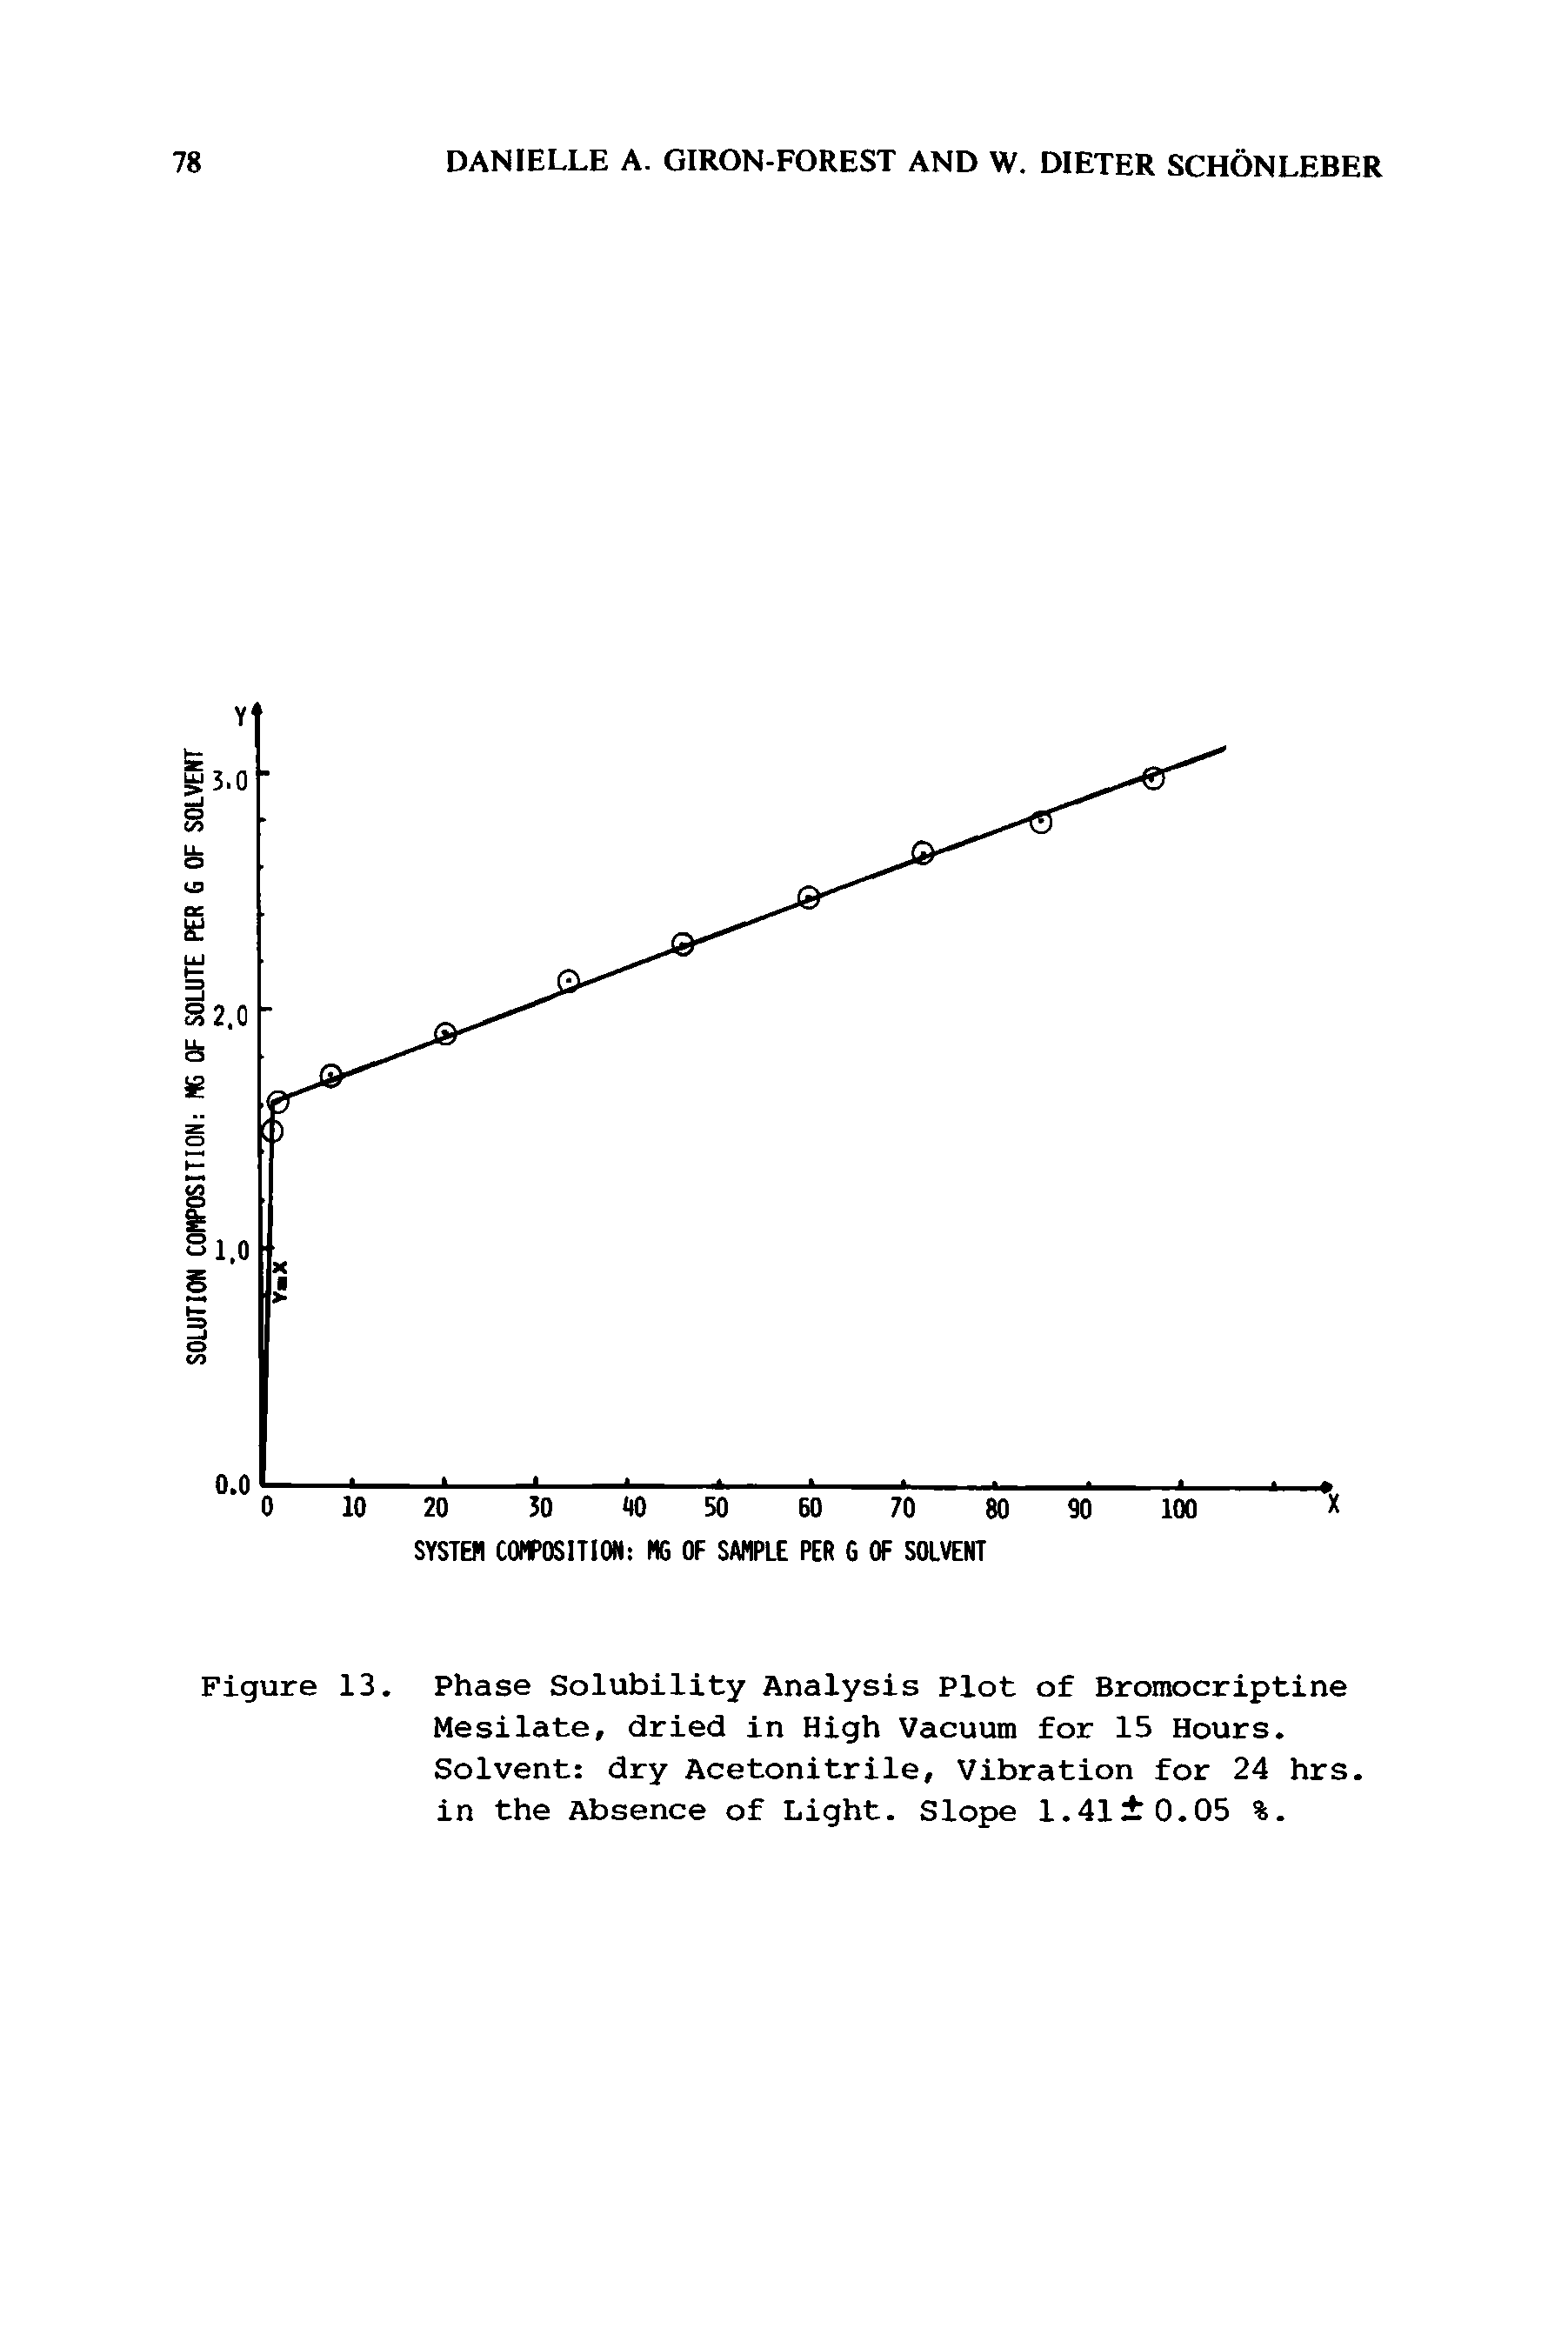 Figure 13. Phase Solubility Analysis Plot of Bromocriptine Mesilate, dried in High Vacuum for 15 Hours. Solvent dry Acetonitrile, Vibration for 24 hrs. in the Absence of Light. Slope 1.41 0.05 %.